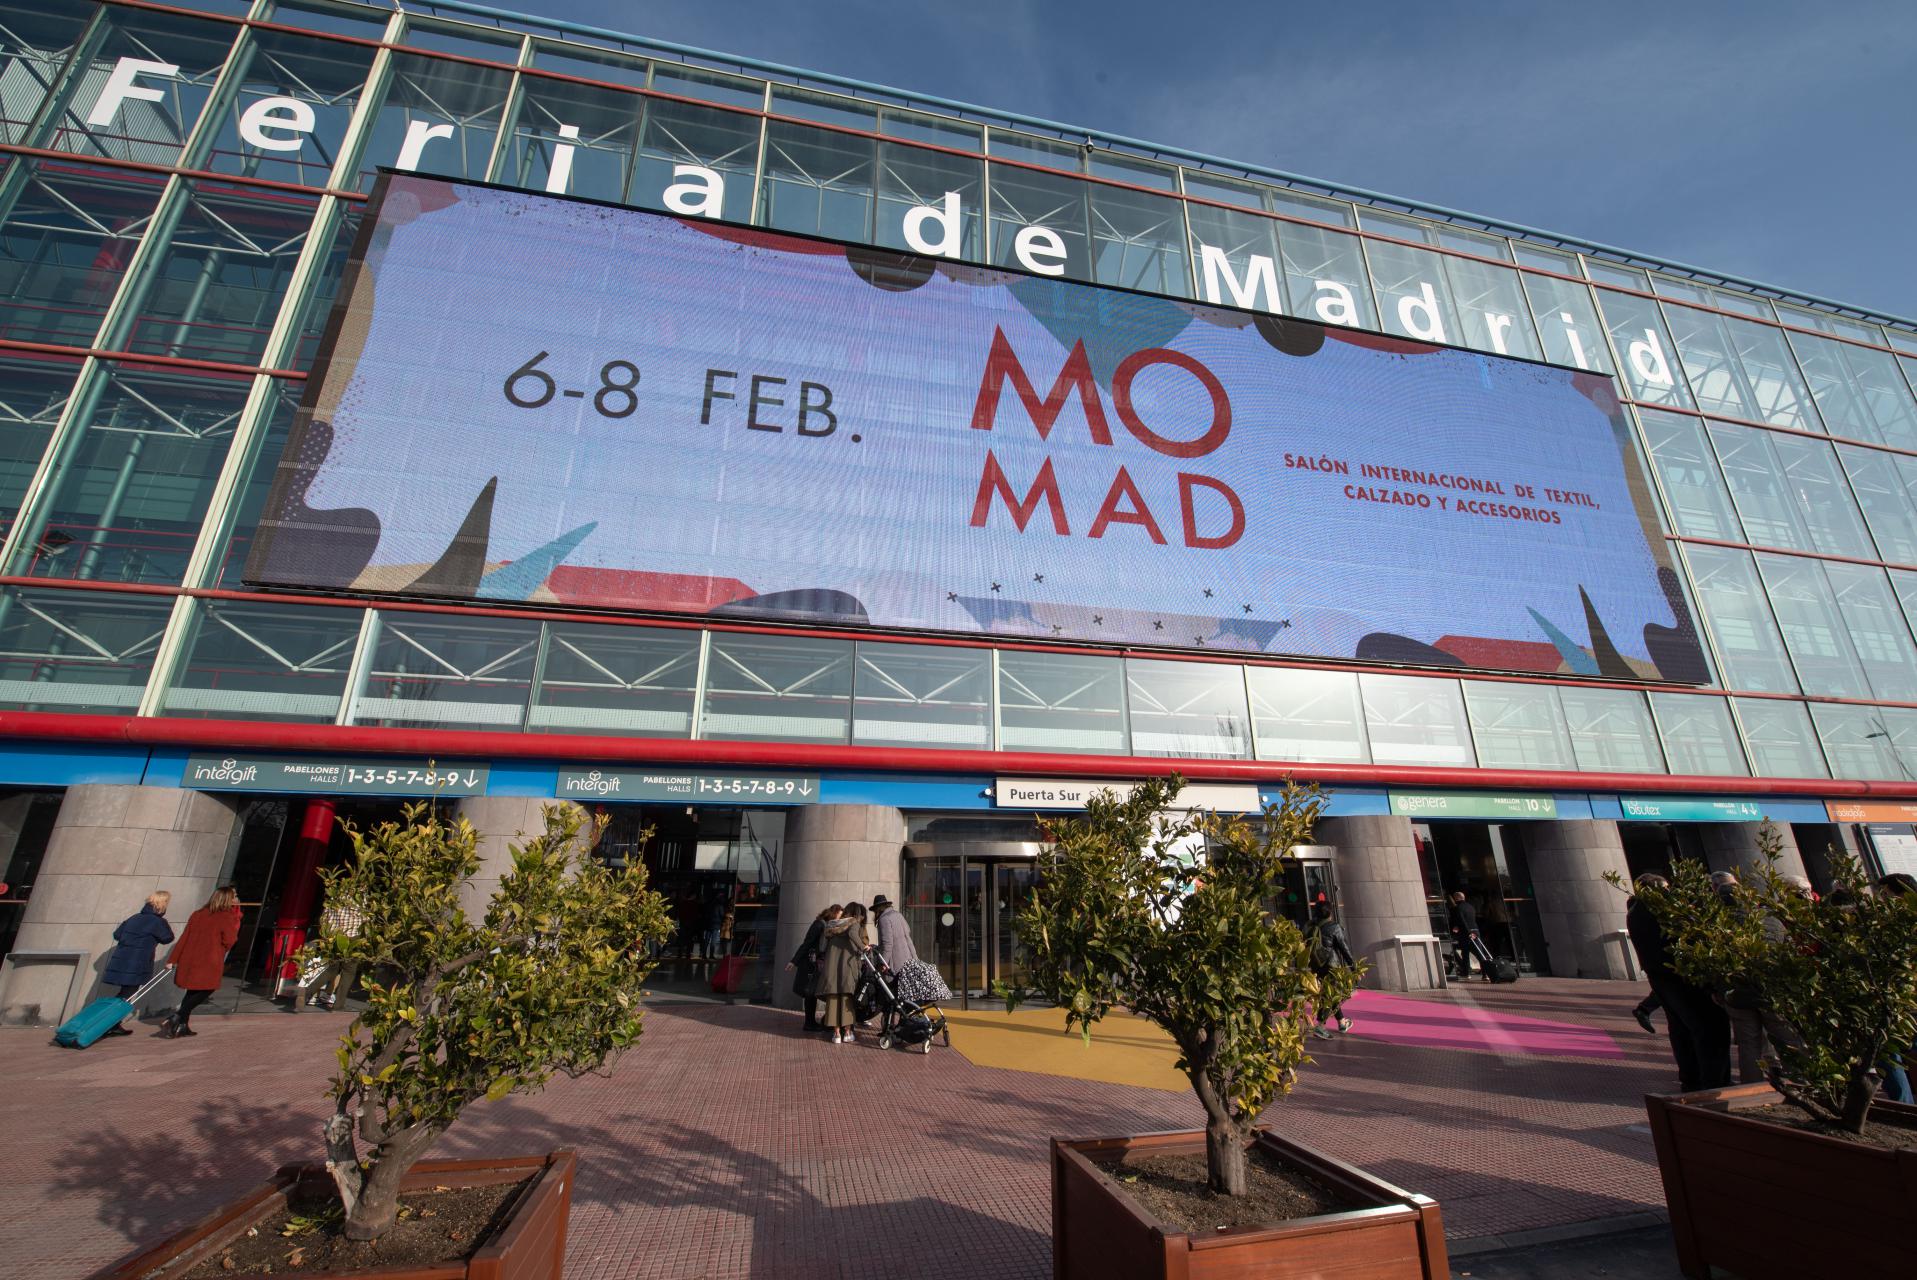 MOMAD February 2020 was visited by 15,225 professionals from the textile, accessories and footwear sector